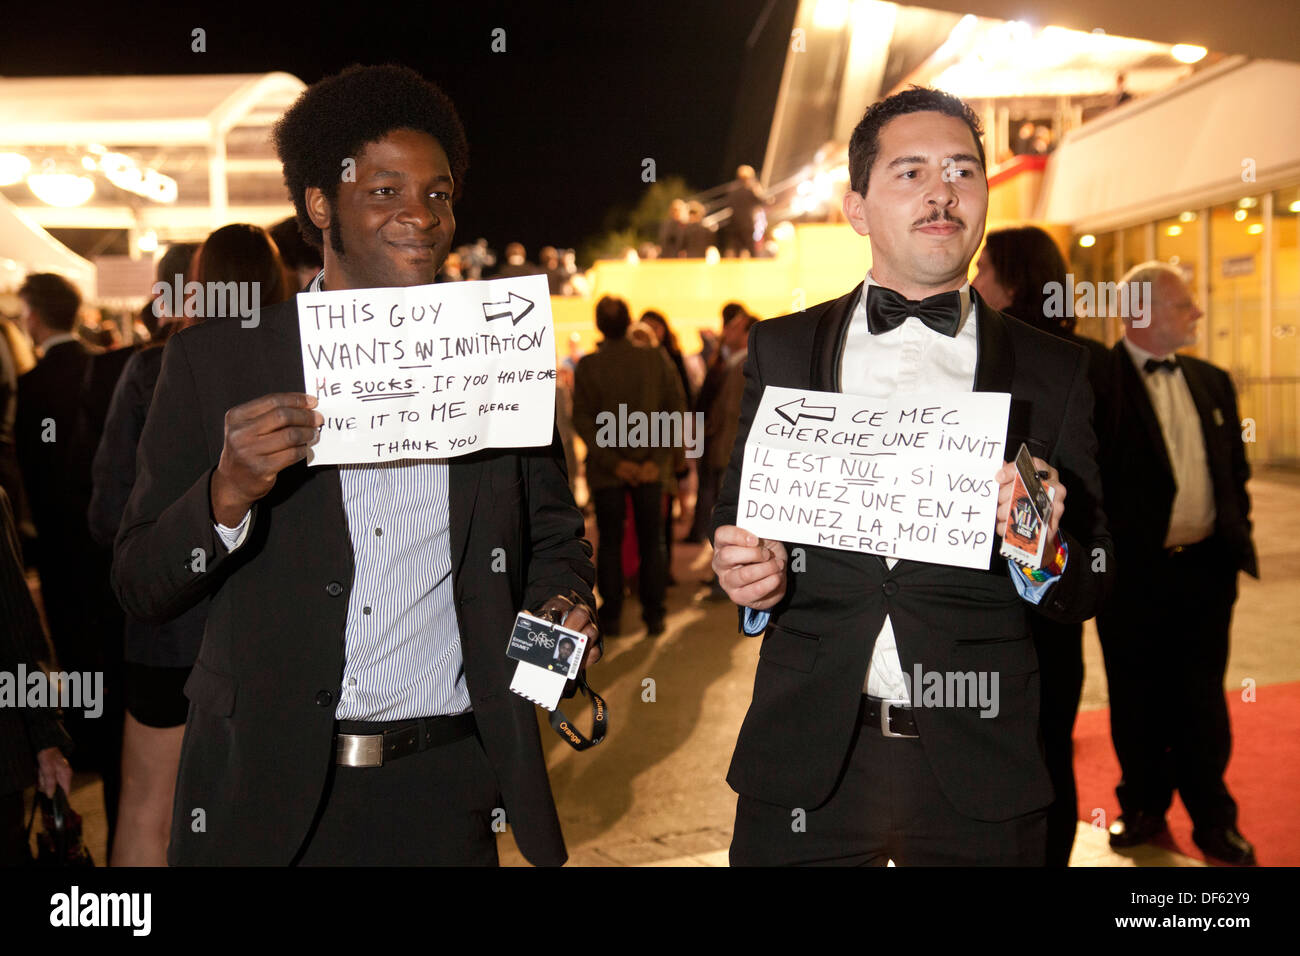 Festival goers hold signs asking for tickets to movie screenings at Le Festival International du Film de Cannes Stock Photo